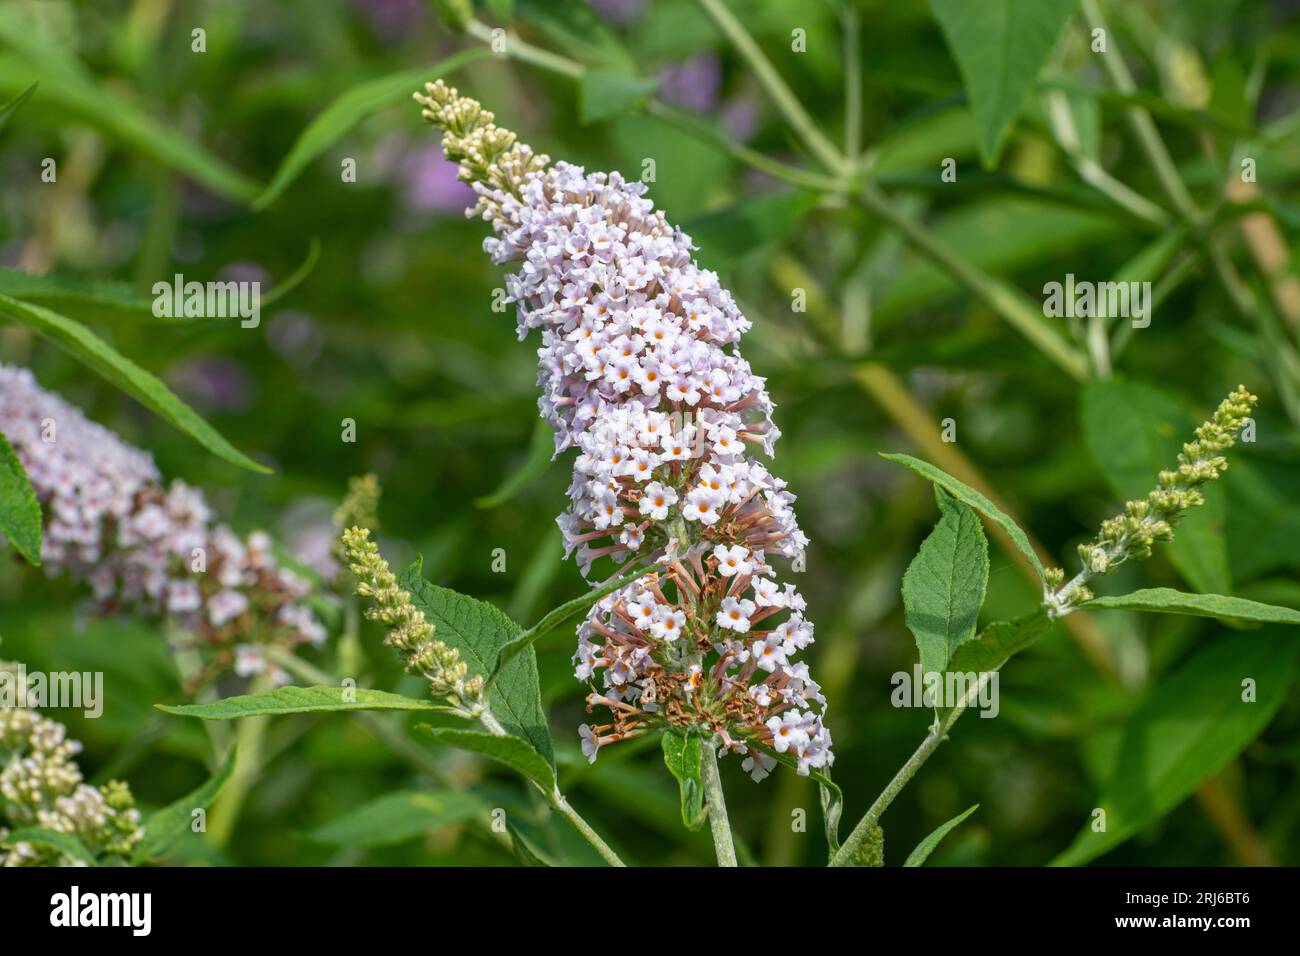 Buddleja davidii Les Kneal (buddleia variety), known as a butterfly bush, in flower during august or summer, UK Stock Photo